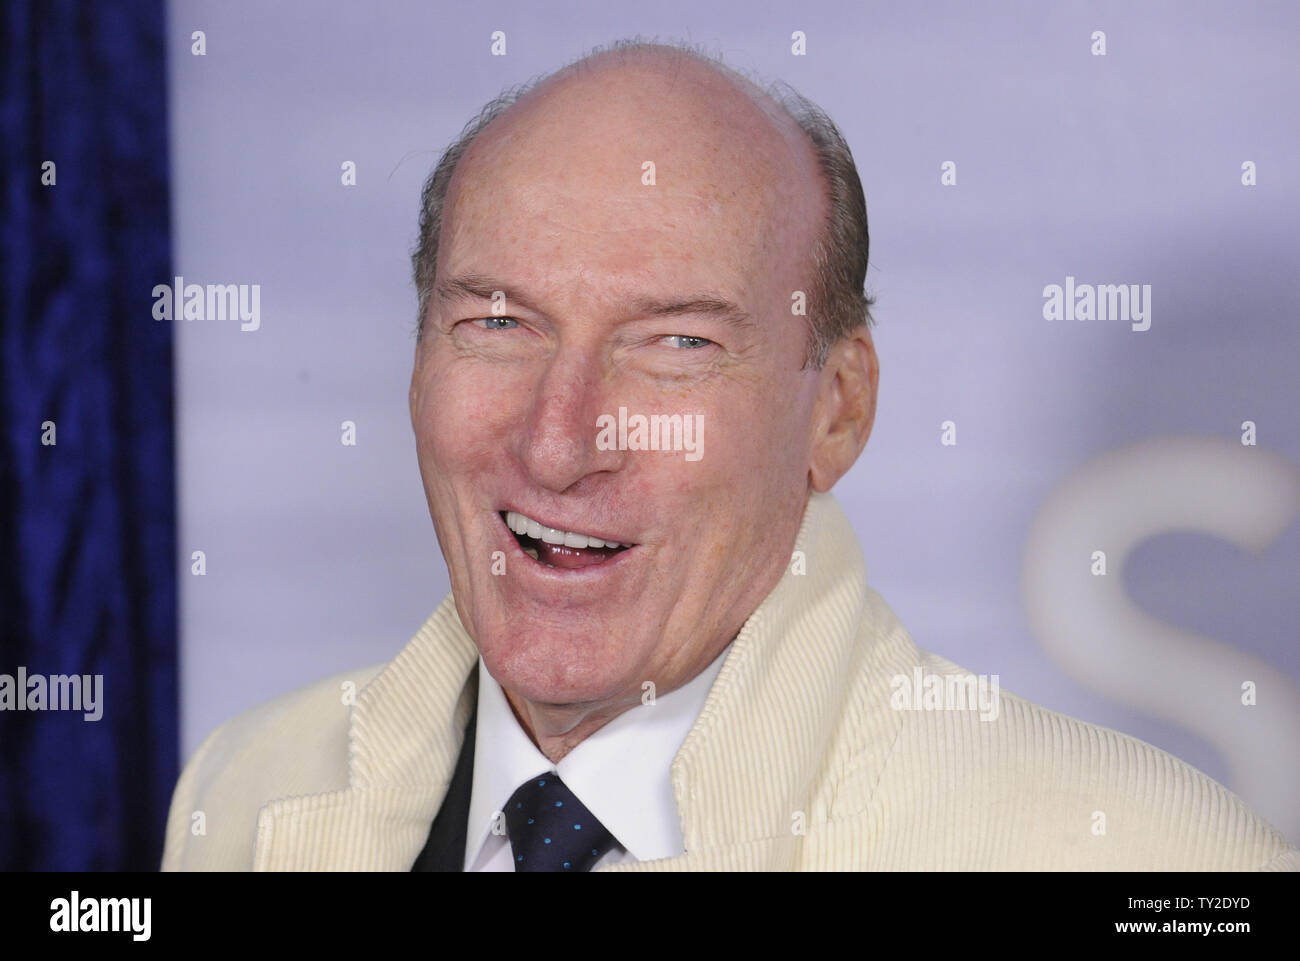 Actor Ed Lauter attends a screening of the film 'Super 8' held at the Academy of Motion Picture Arts and Sciences, Samuel Goldwyn Theatre in Beverly Hills, California on November 22, 2011.      UPI/ Phil McCarten Stock Photo